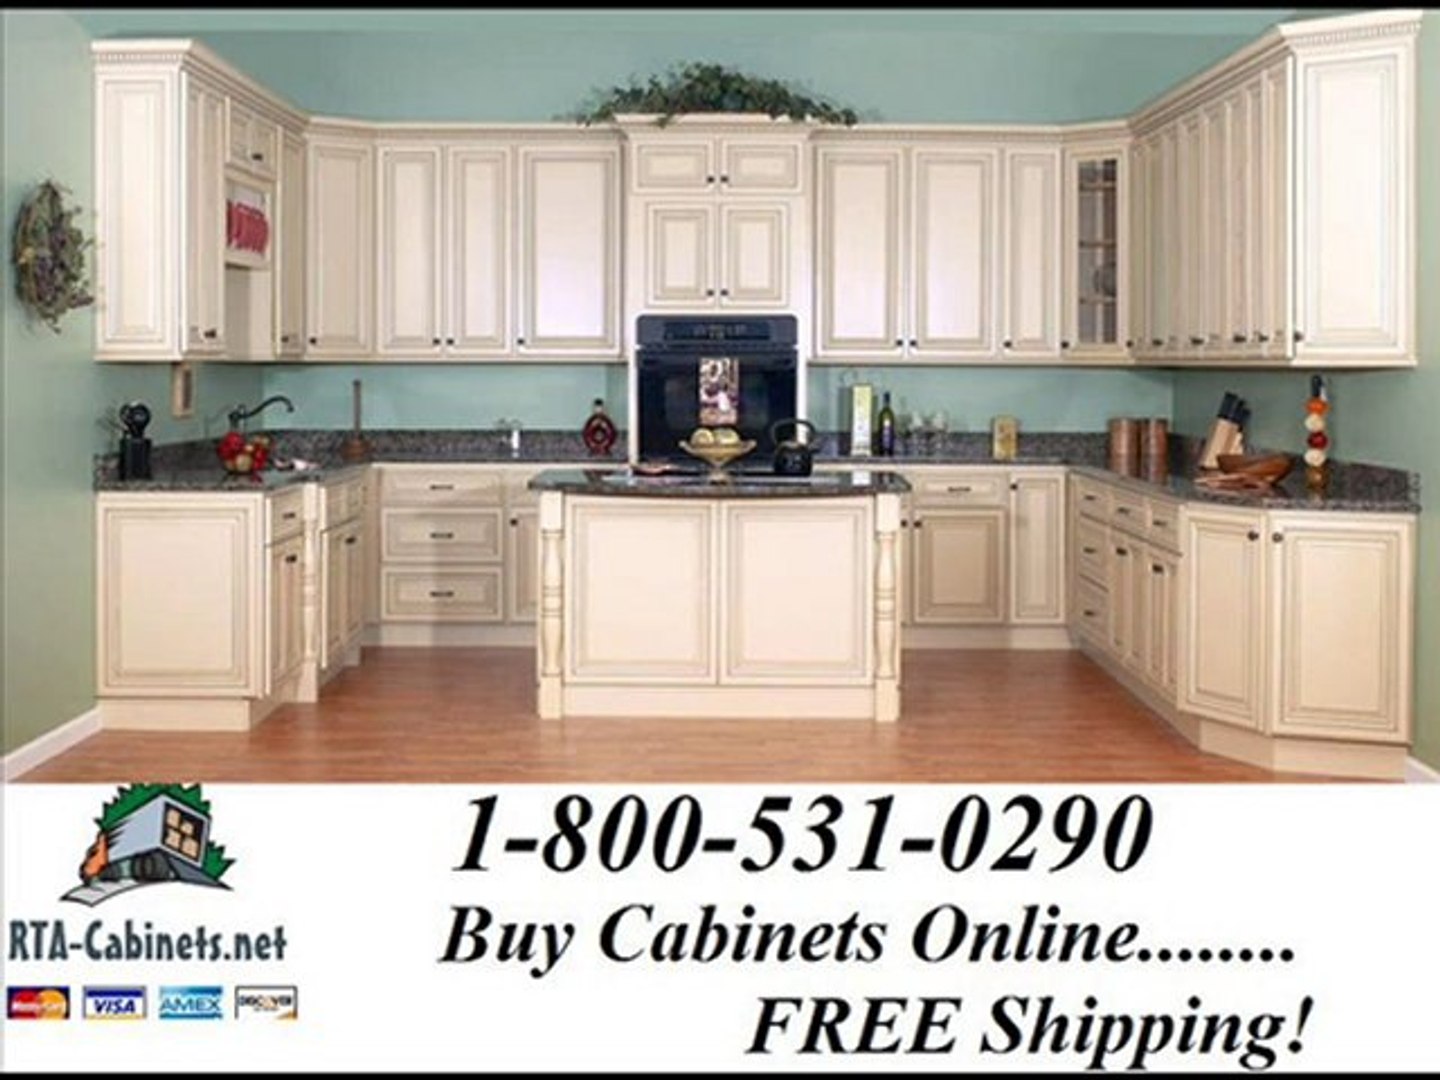 Society Hill Cabinets 1 800 531 0290 Www Rta Cabinets Net Video